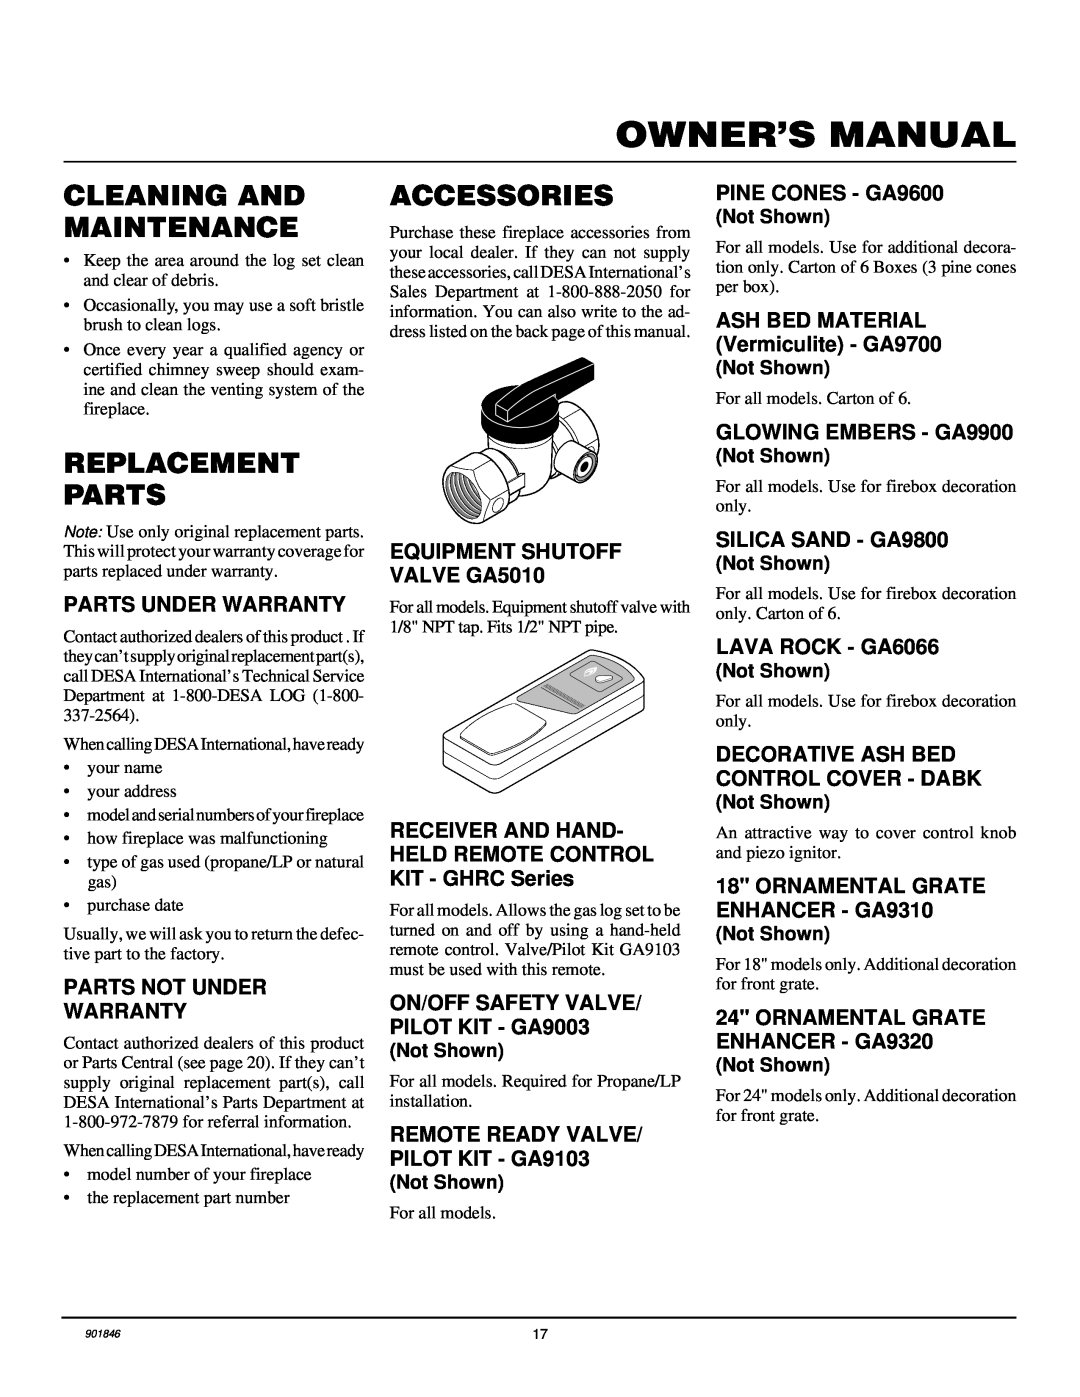 FMI FVTR24, FVTR18 installation manual Cleaning And Maintenance, Replacement Parts, Accessories 